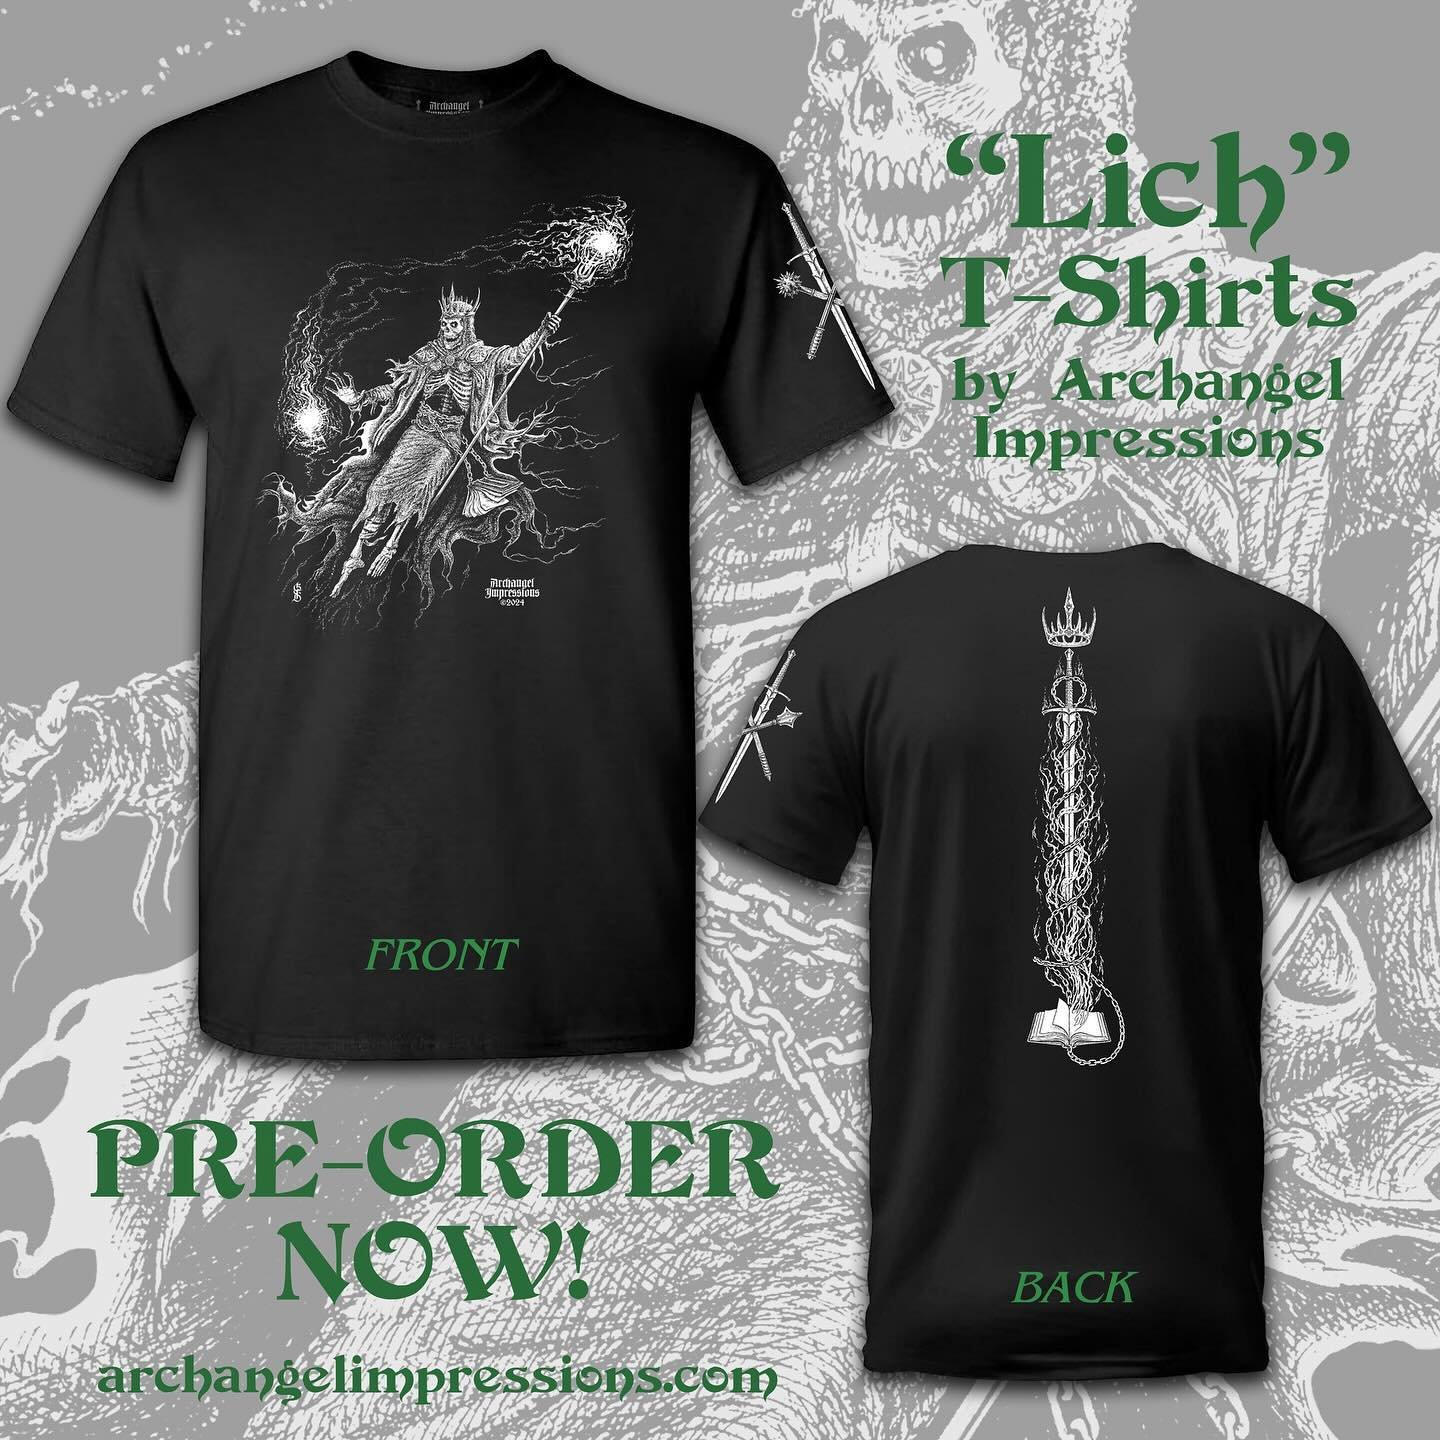 ⚔️🔥Lich tee Pre-Sale is live!🔥⚔️

In case you missed the long-sleeve version, the Lich is making his way onto short-sleeved Tshirts just in time for the scorching hell of summer.

Pre-orders will close Friday, May 17 so order while you can! ➡️archa